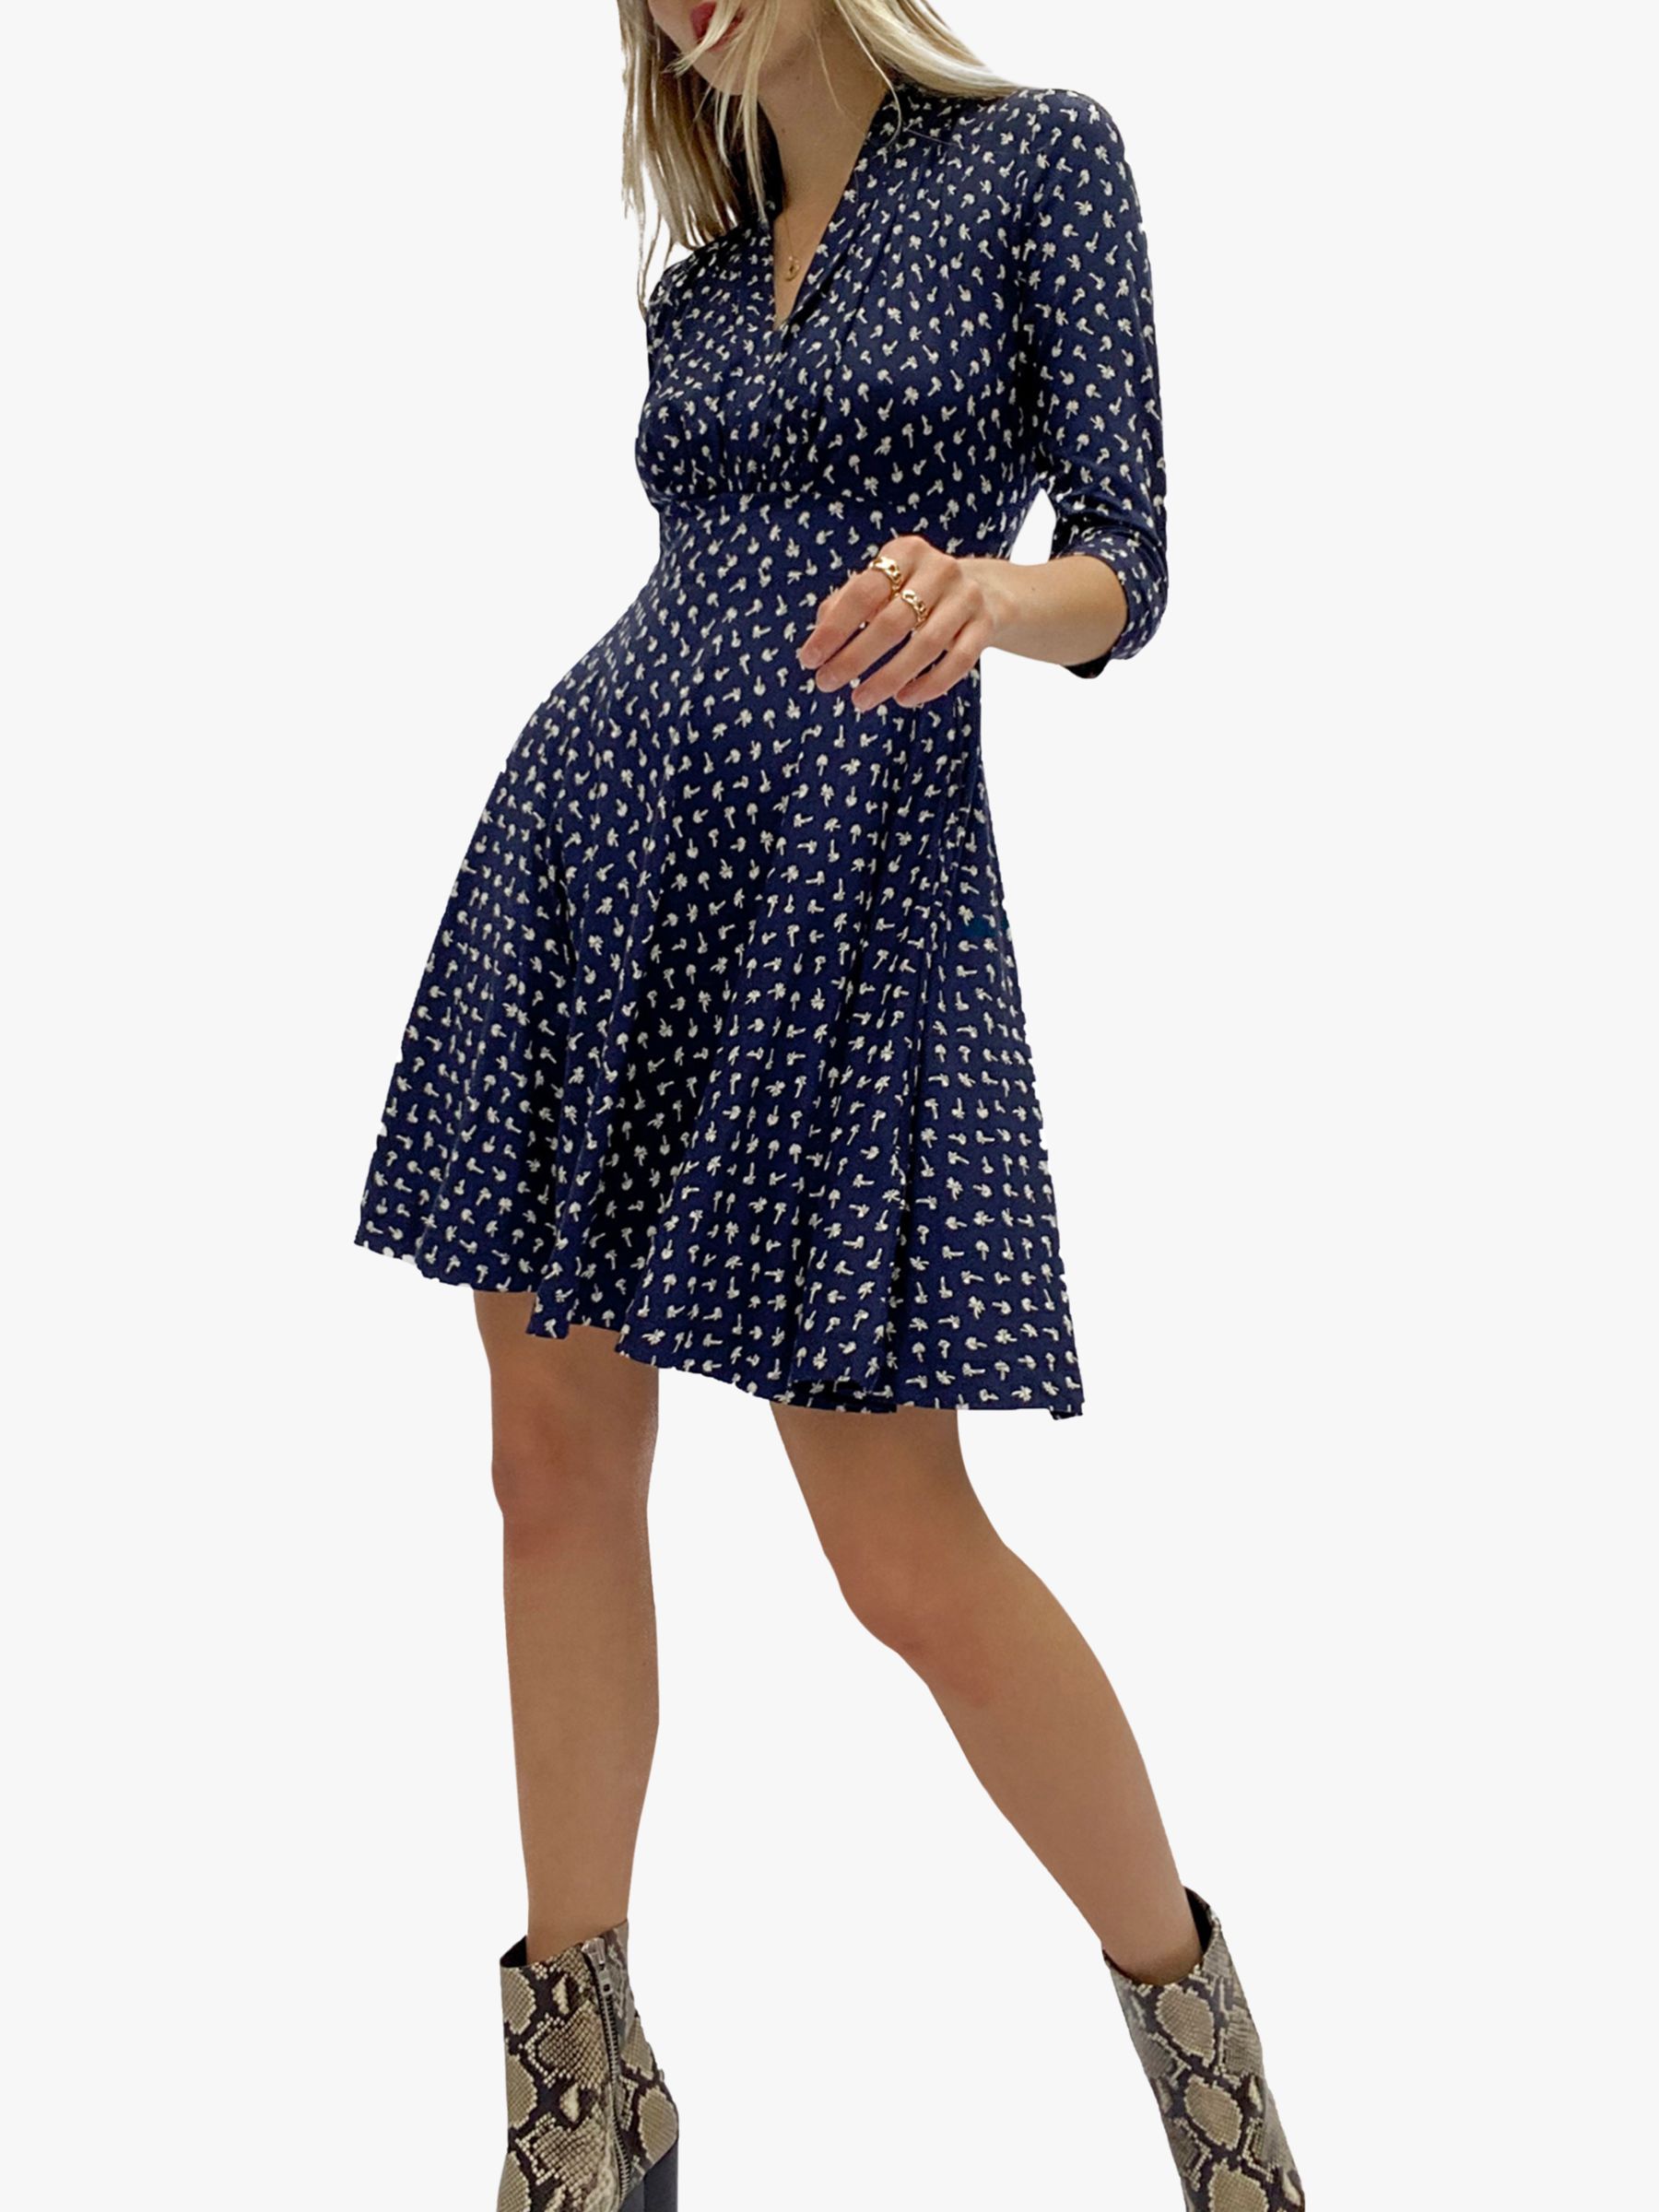 frances jersey dress french connection